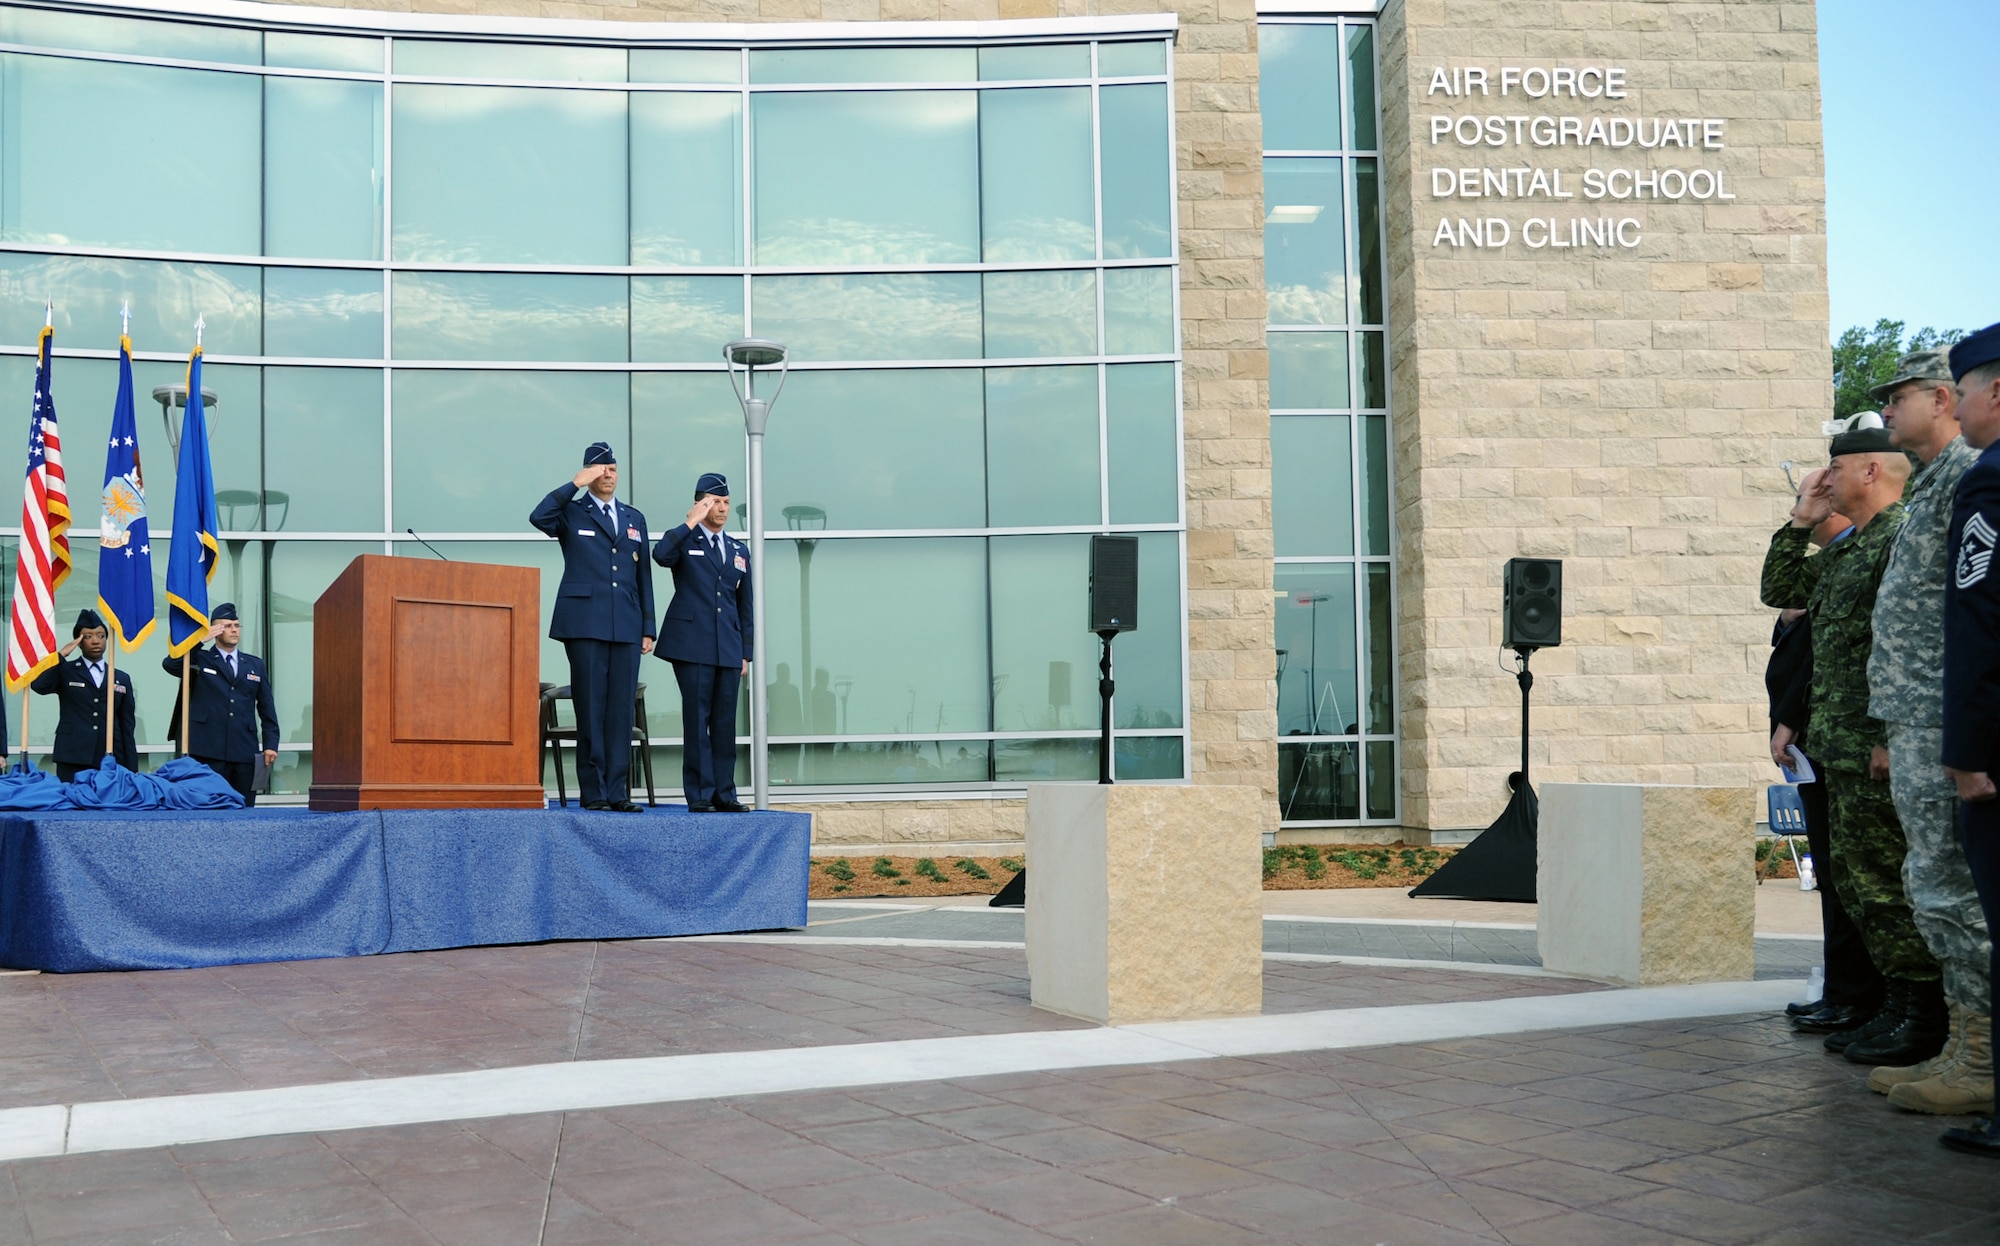 Maj. Gens. Byron Hepburn and Gerard Caron salute during the playing of the national anthem at the ribbon cutting ceremony for the new Air Force Postgraduate Dental School and Clinic, Joint Base San Antonio-Lackland, Texas, June 20. The school is the Air Force flagship for dental education and specialty services. Hepburn is the director of the San Antonio Military Health System and commander of the 59th Medical Wing. Caron is the assistant surgeon general for Dental Services and commander of the 79th Medical Wing. (U.S. Air Force photo/Airman 1st Class Courtney Moses)